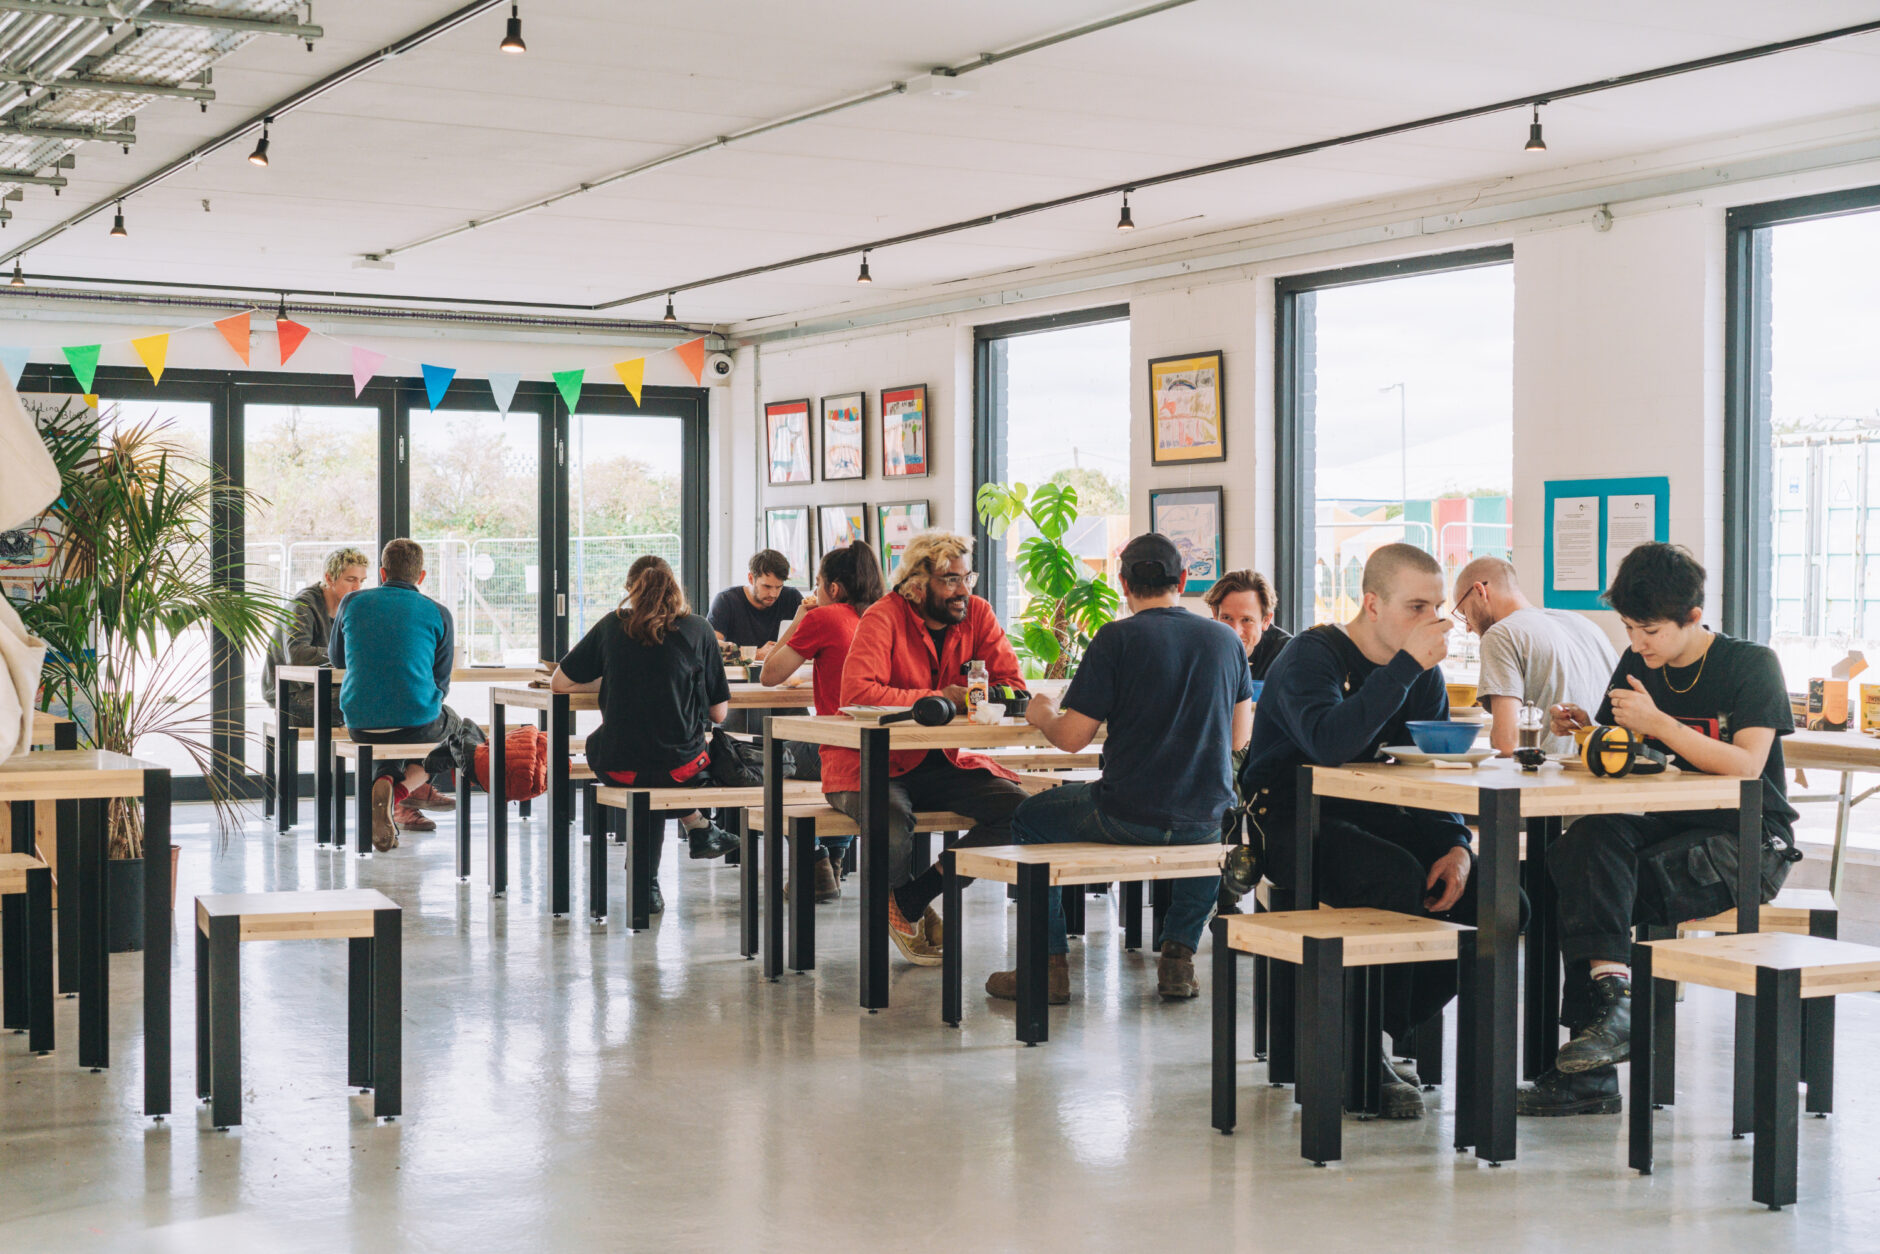 Bloqs Kitchen Bar Deli for meals, networking and co-working is open to its maker members, partners and the public from 8am-3:30pm, Mon-Sun. Photo: Claudia Agati.